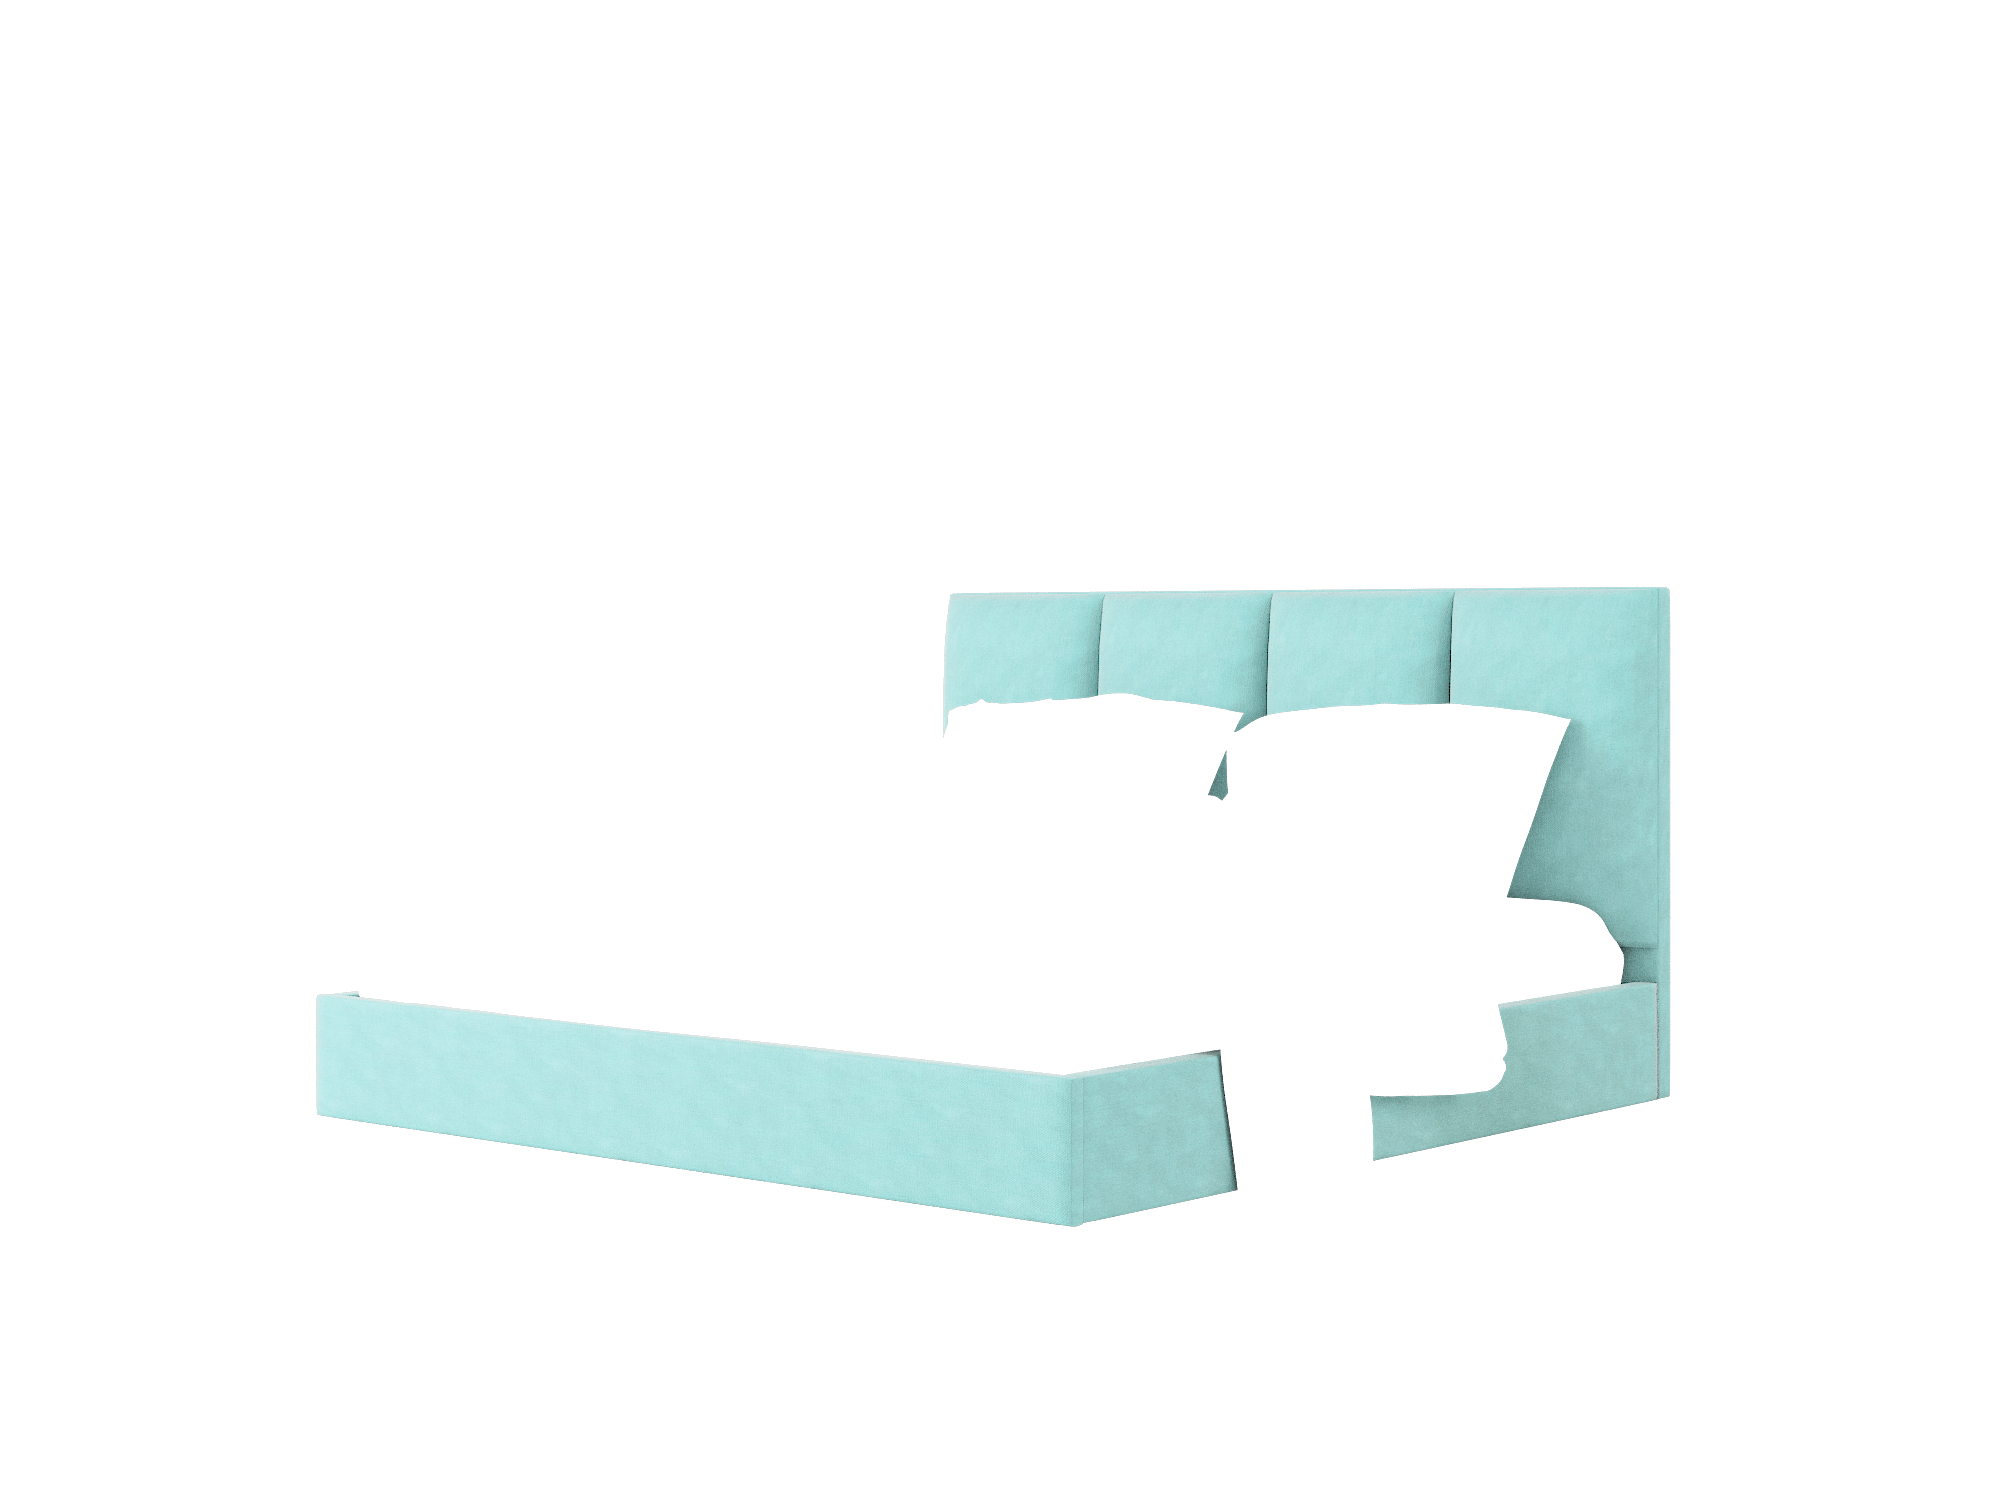 Celine Curious Turquoise Bed King Room Texture